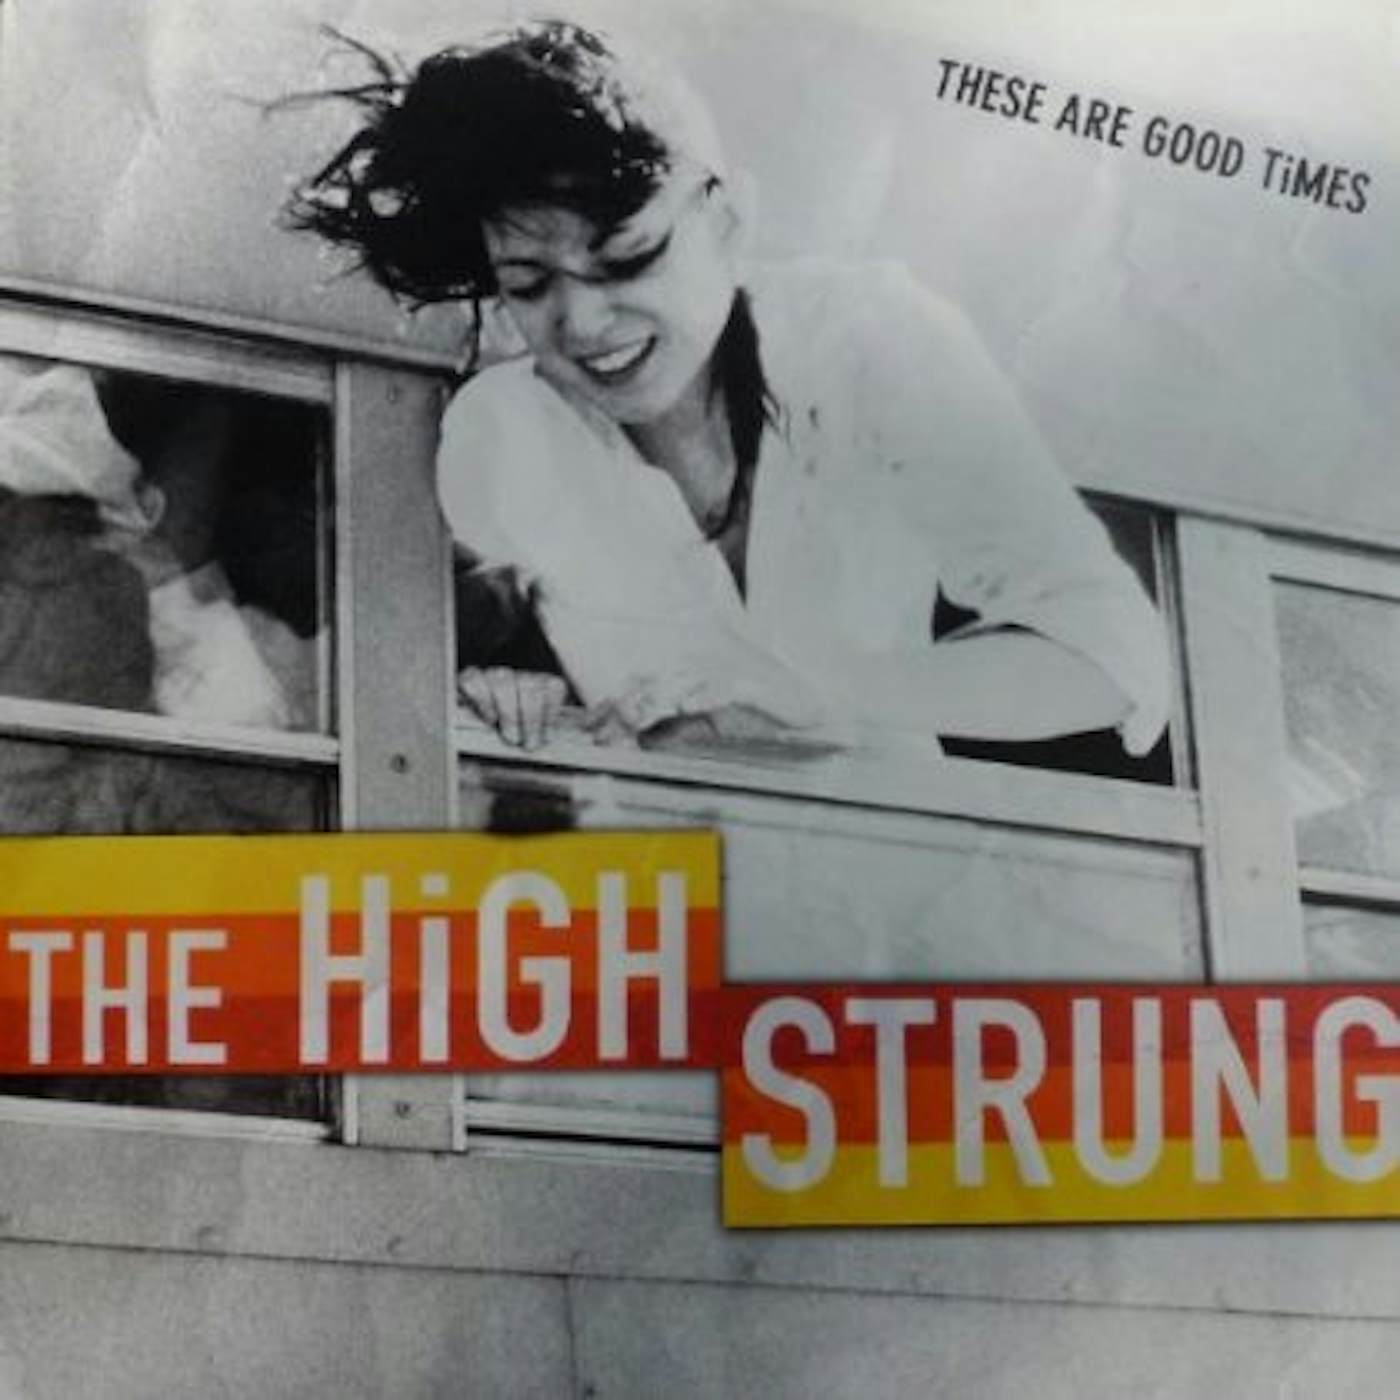 High Strung THESE ARE GOOD TIMES CD